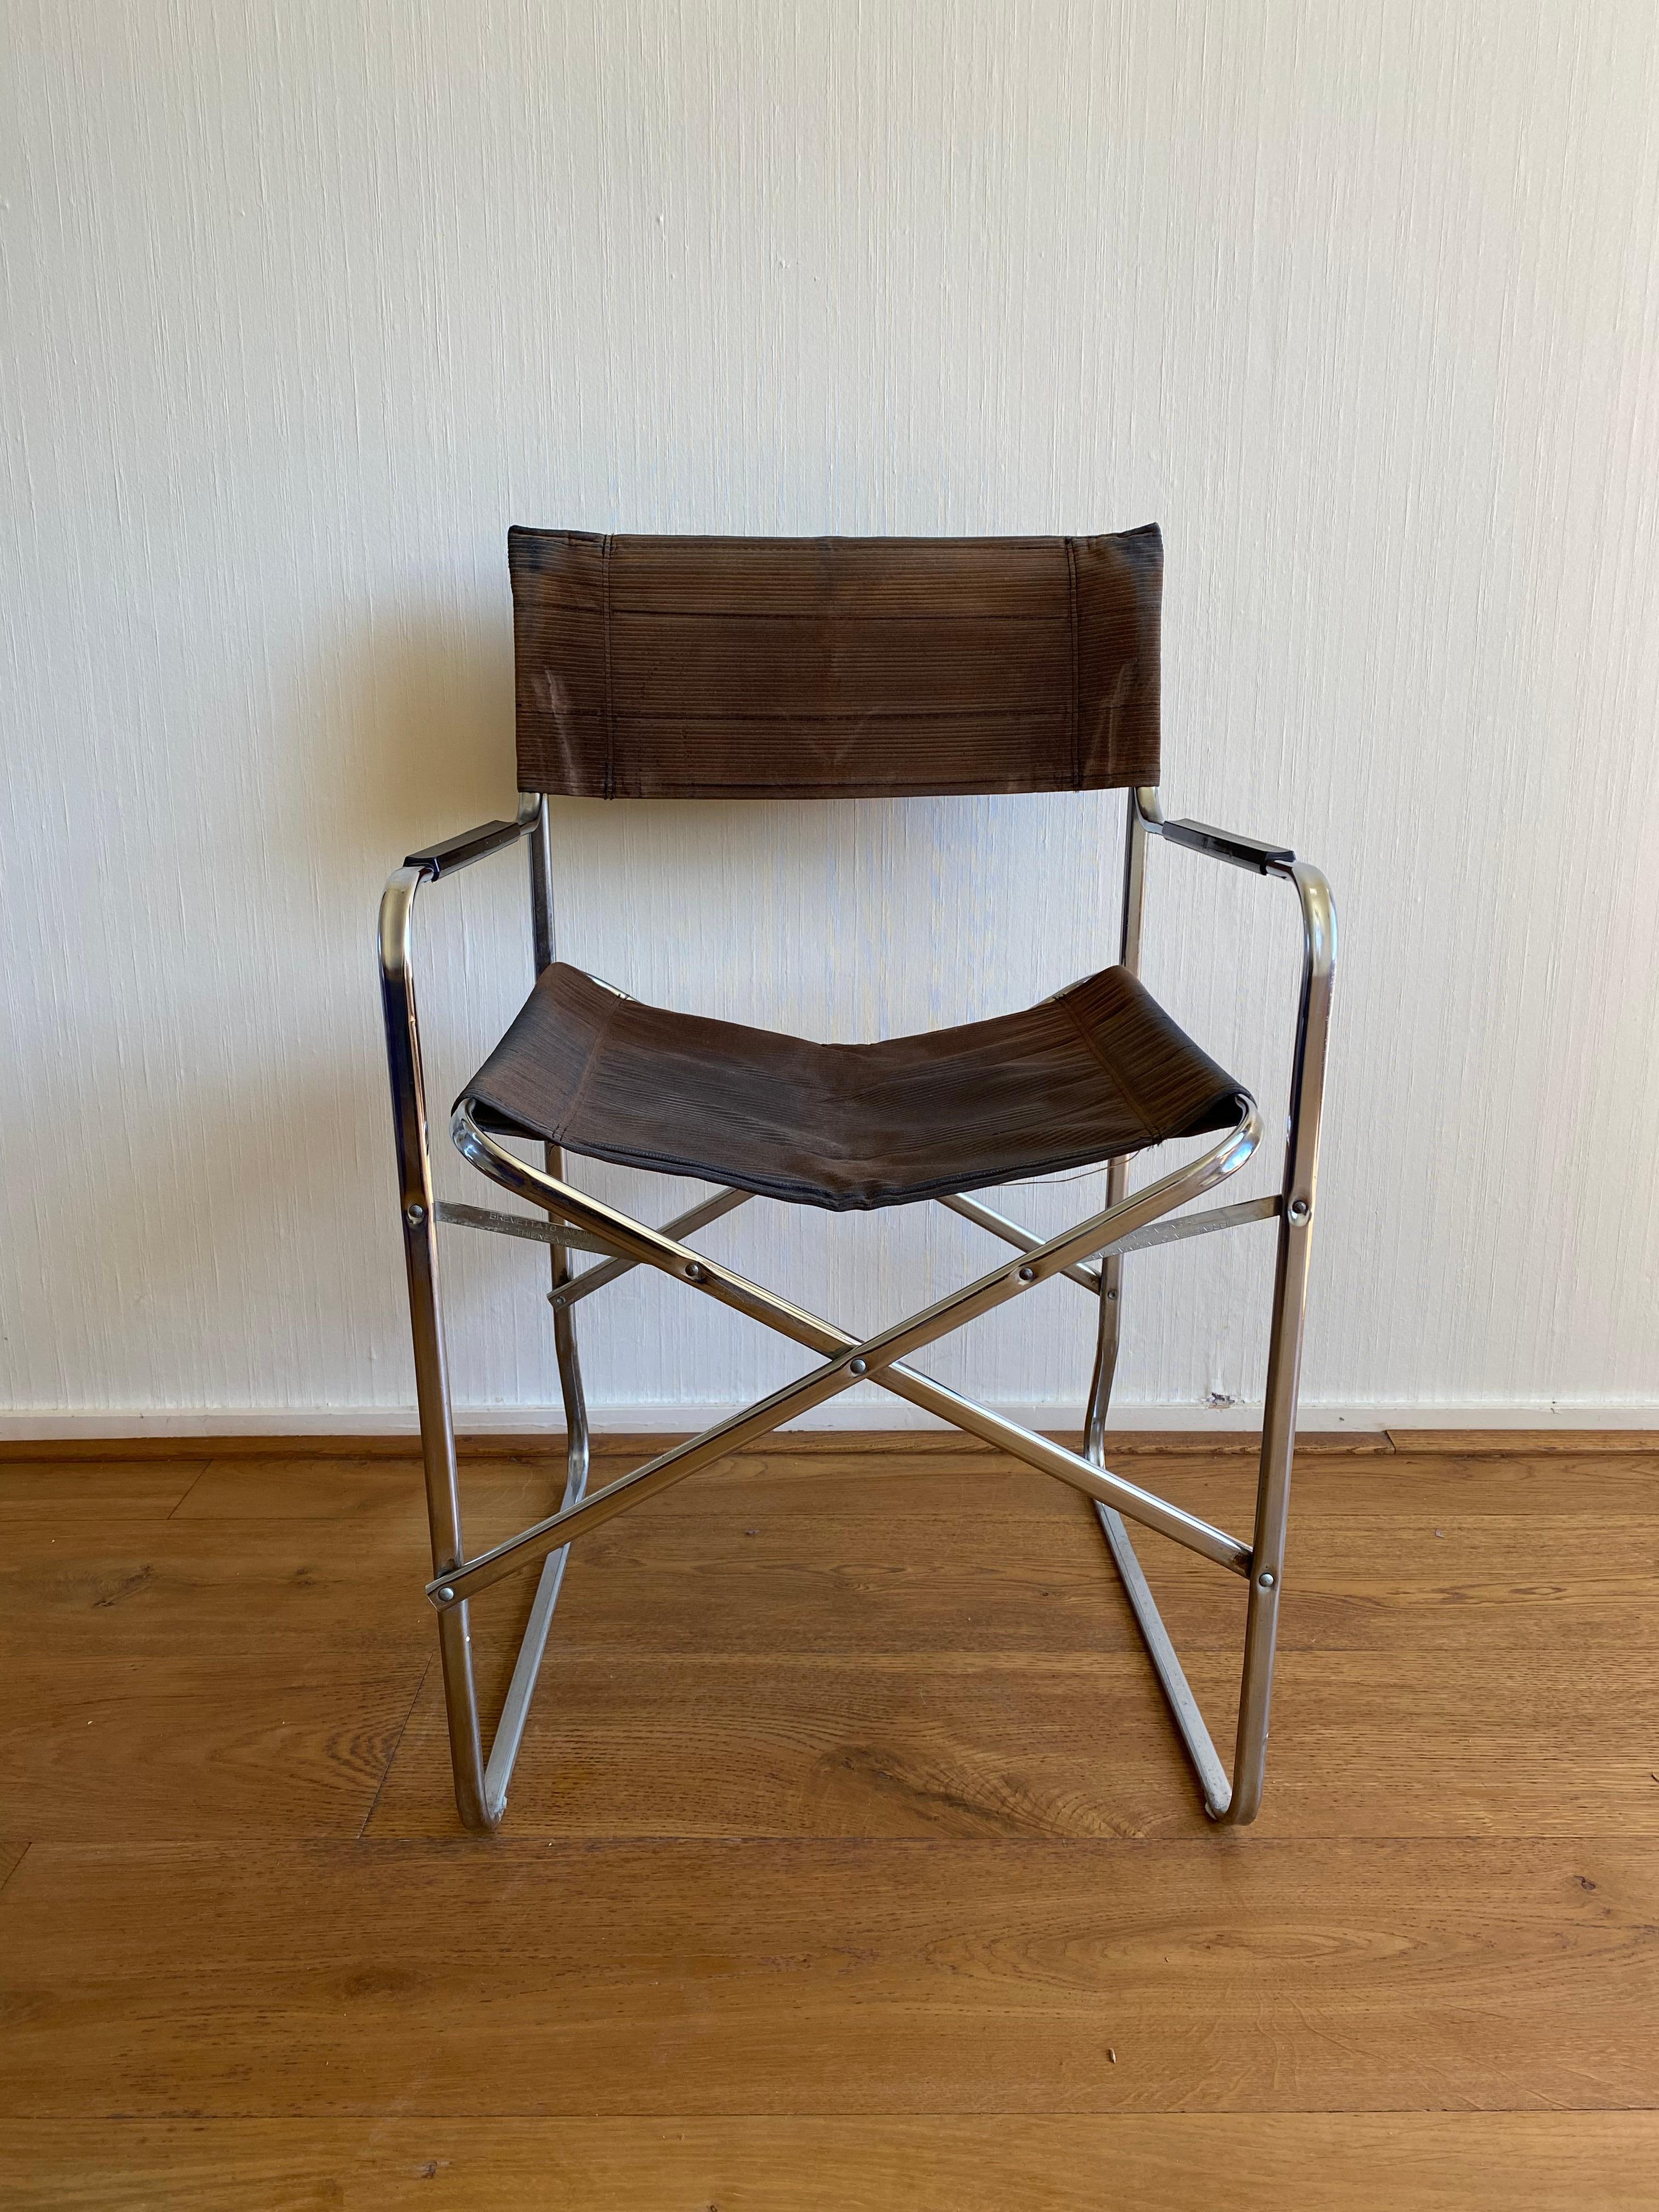 Stunning folding chair with metal frame and original Brown Coduroy fabric. The chair's design is Similar to Gae Aulenti's April Chair for Zanotta and was Manufactured in Italy. The chair is very light and easy to store while it can be folded. It